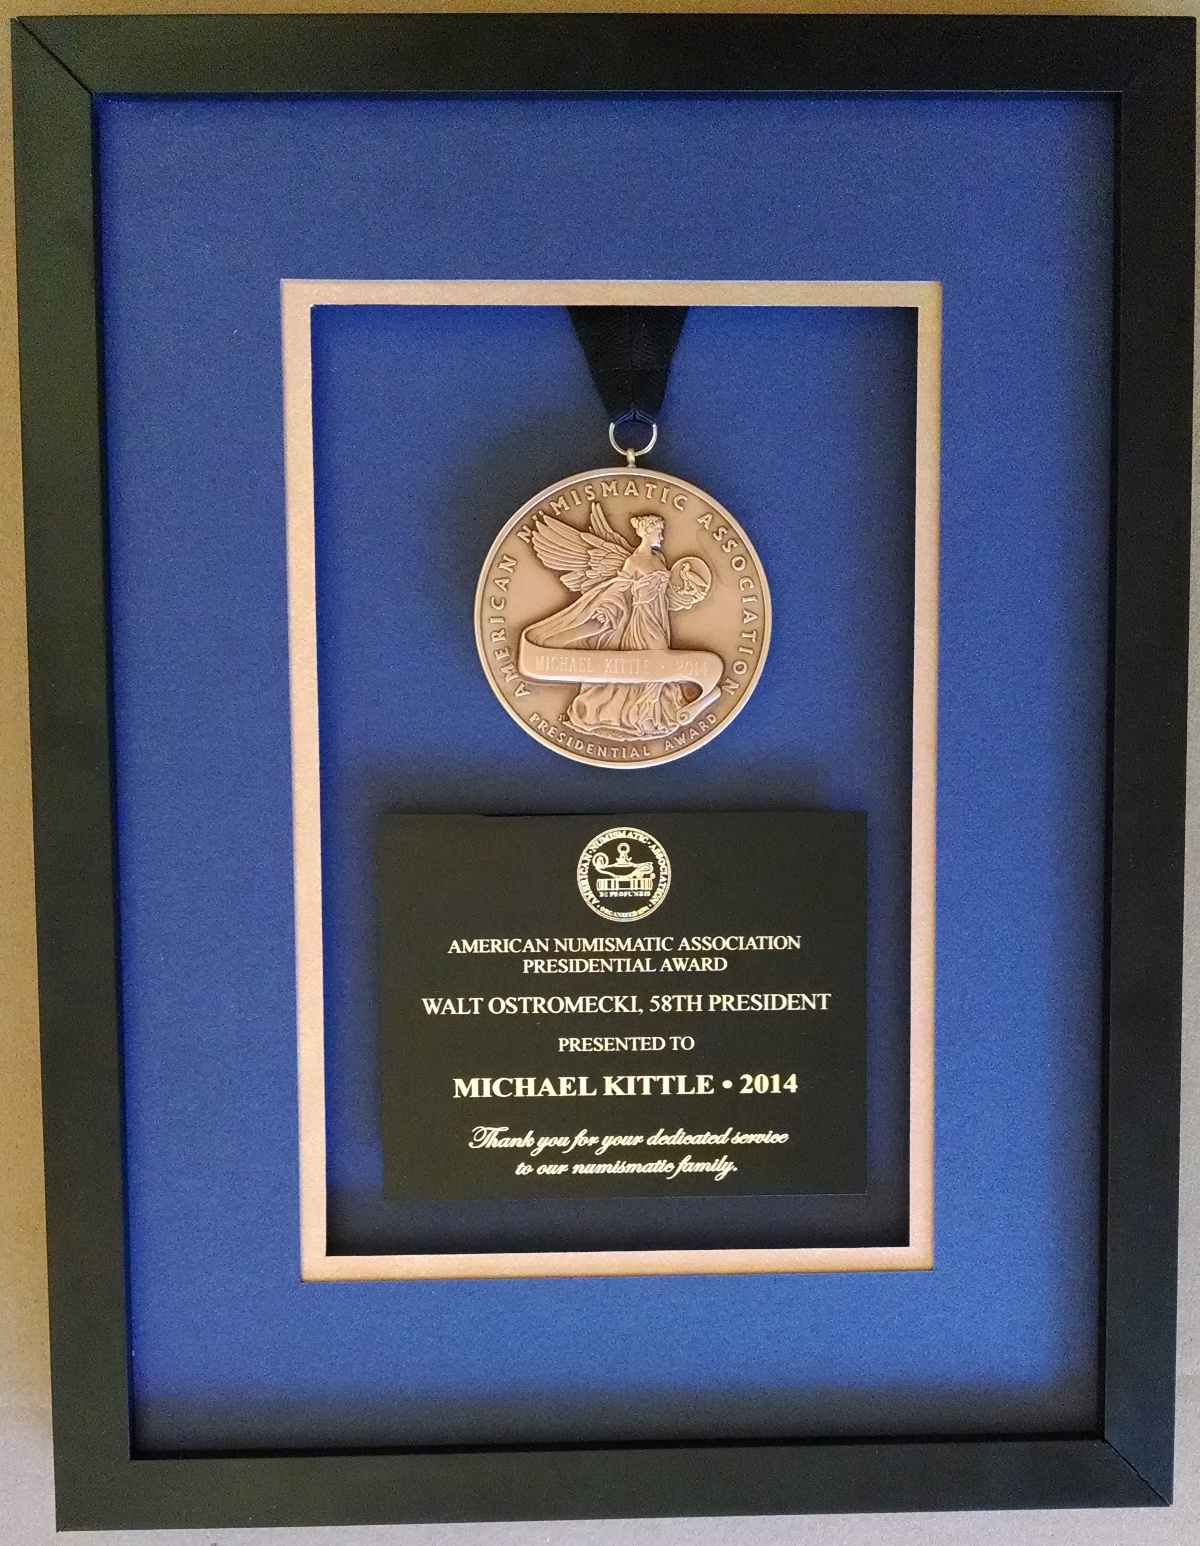 ANA Presidential Award issued to Michael Kittle March 2014